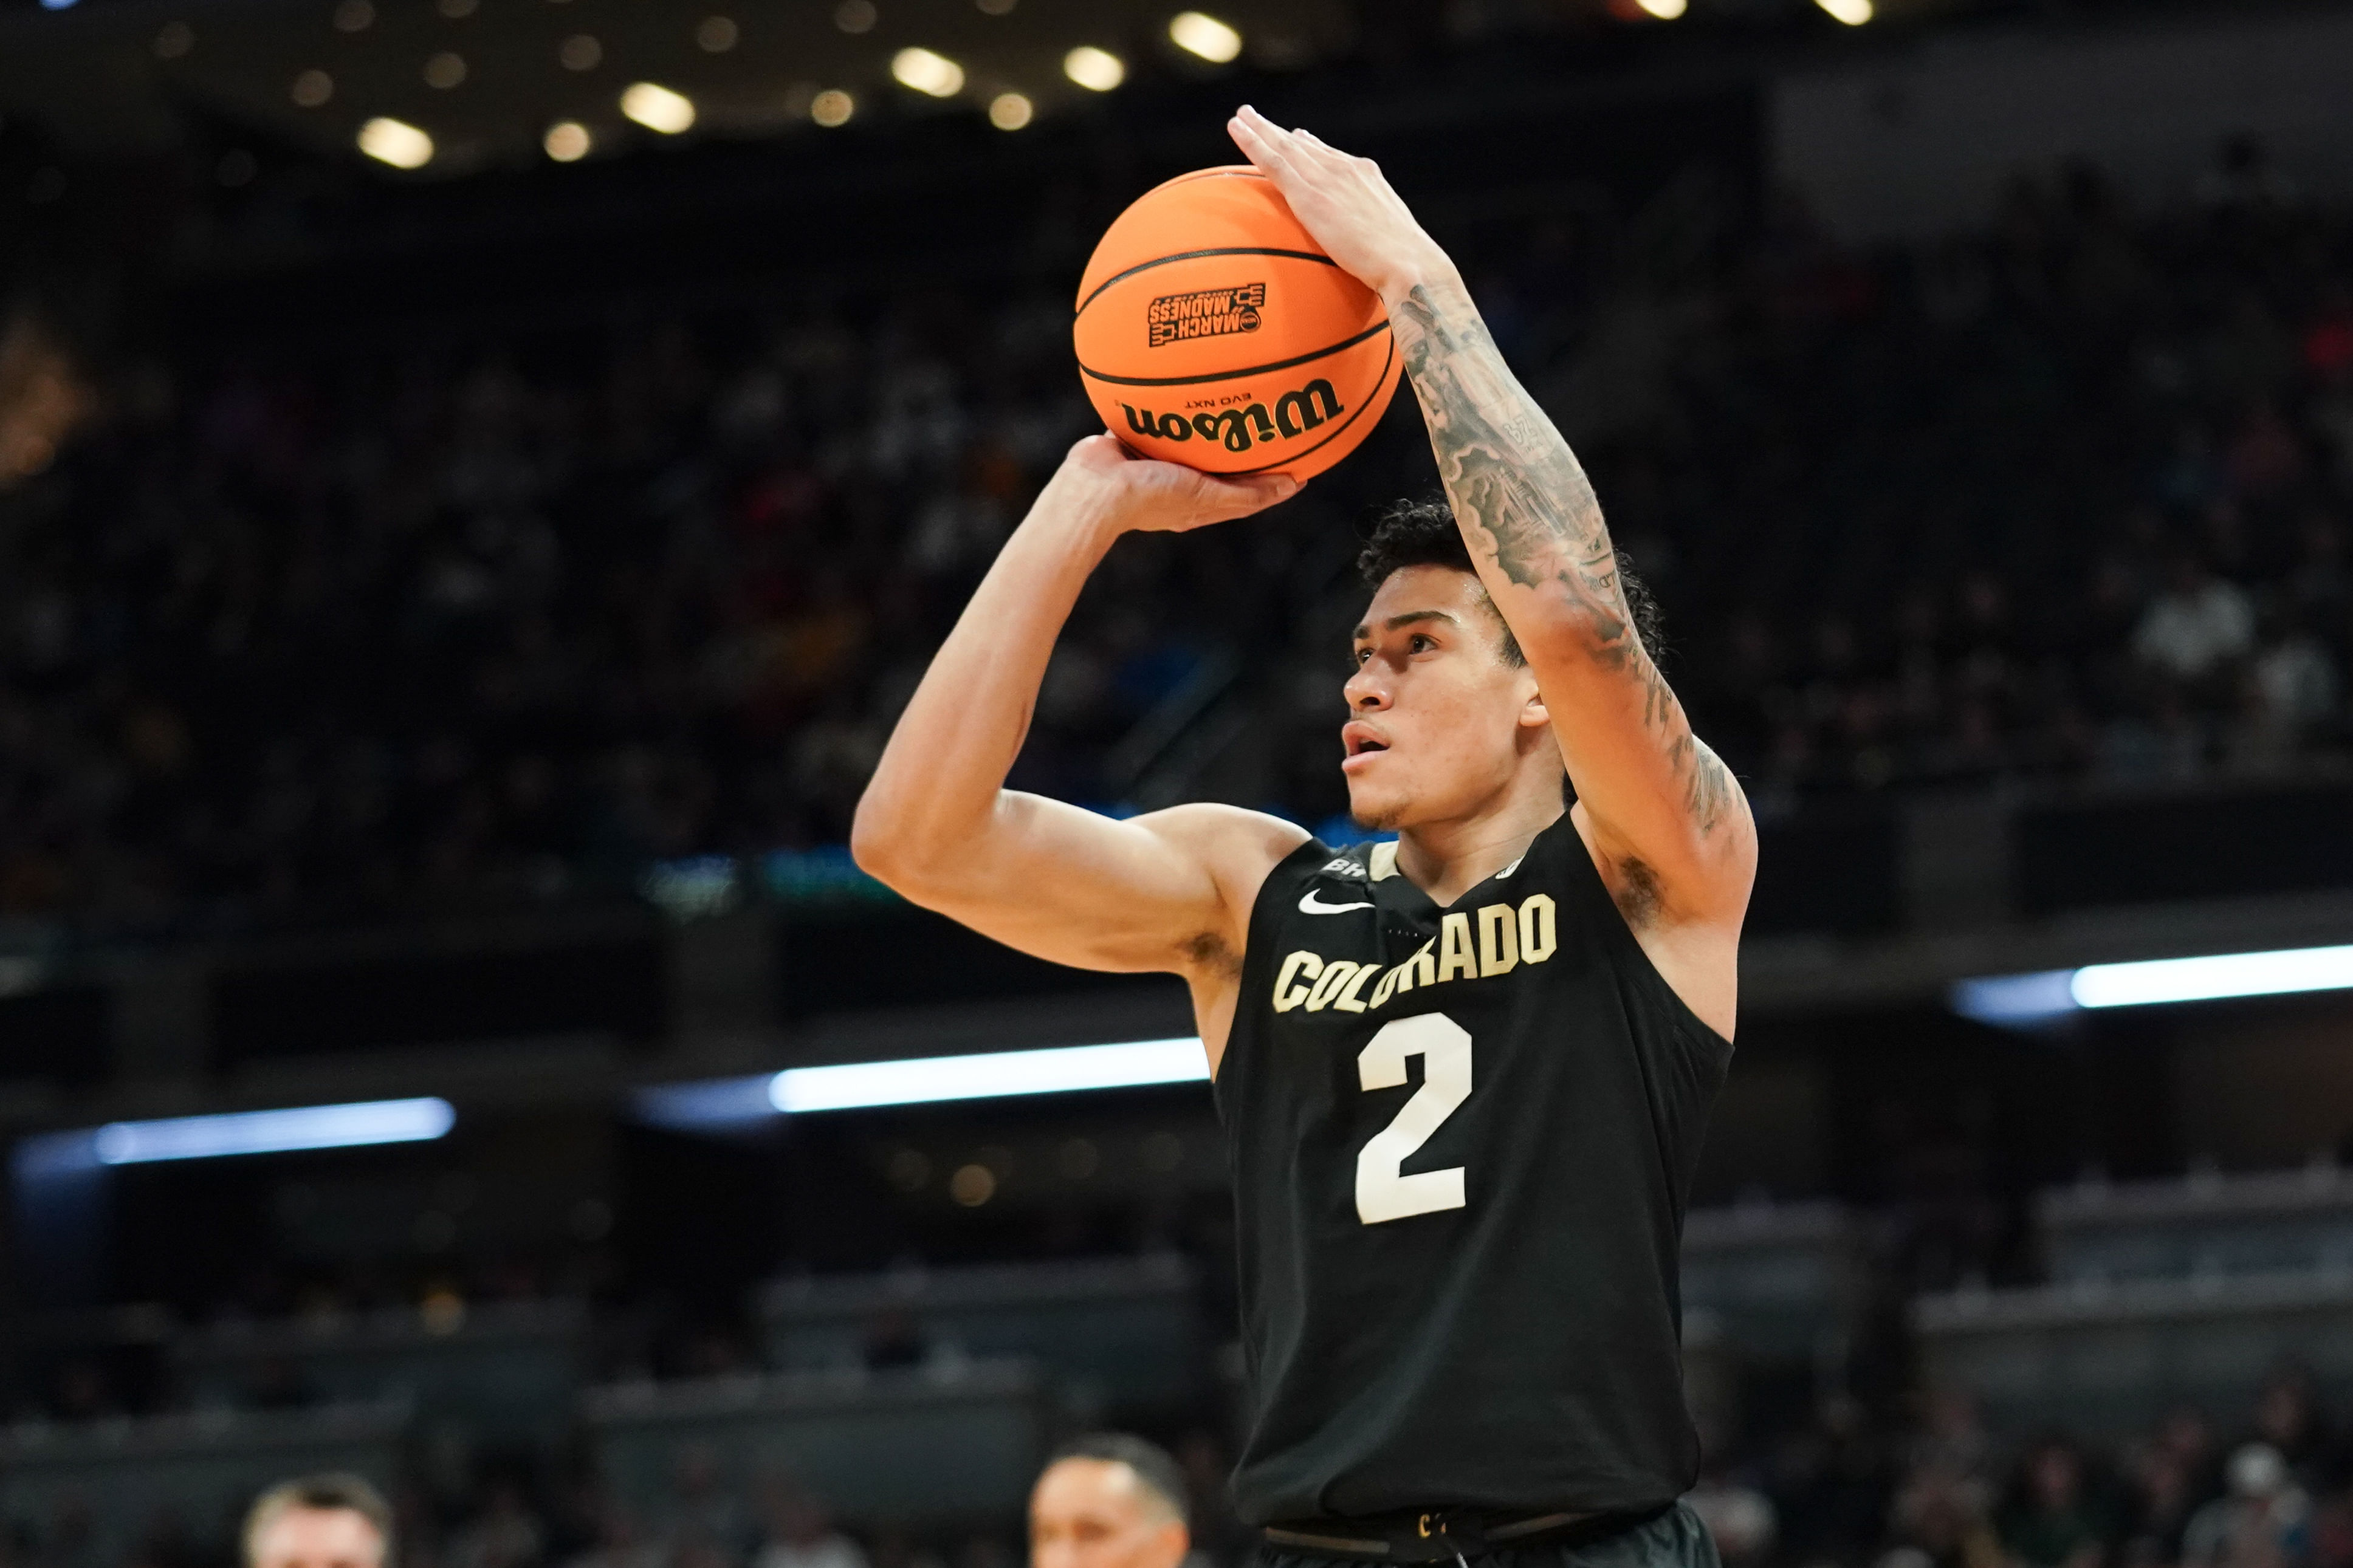 KJ Simpson started for 37 games with the Colorado Buffaloes and tallied 19.7 points, 5.8 rebounds, 4.9 assists and 1.6 steals in 35.1 minutes per game this past season (Image Source: IMAGN).